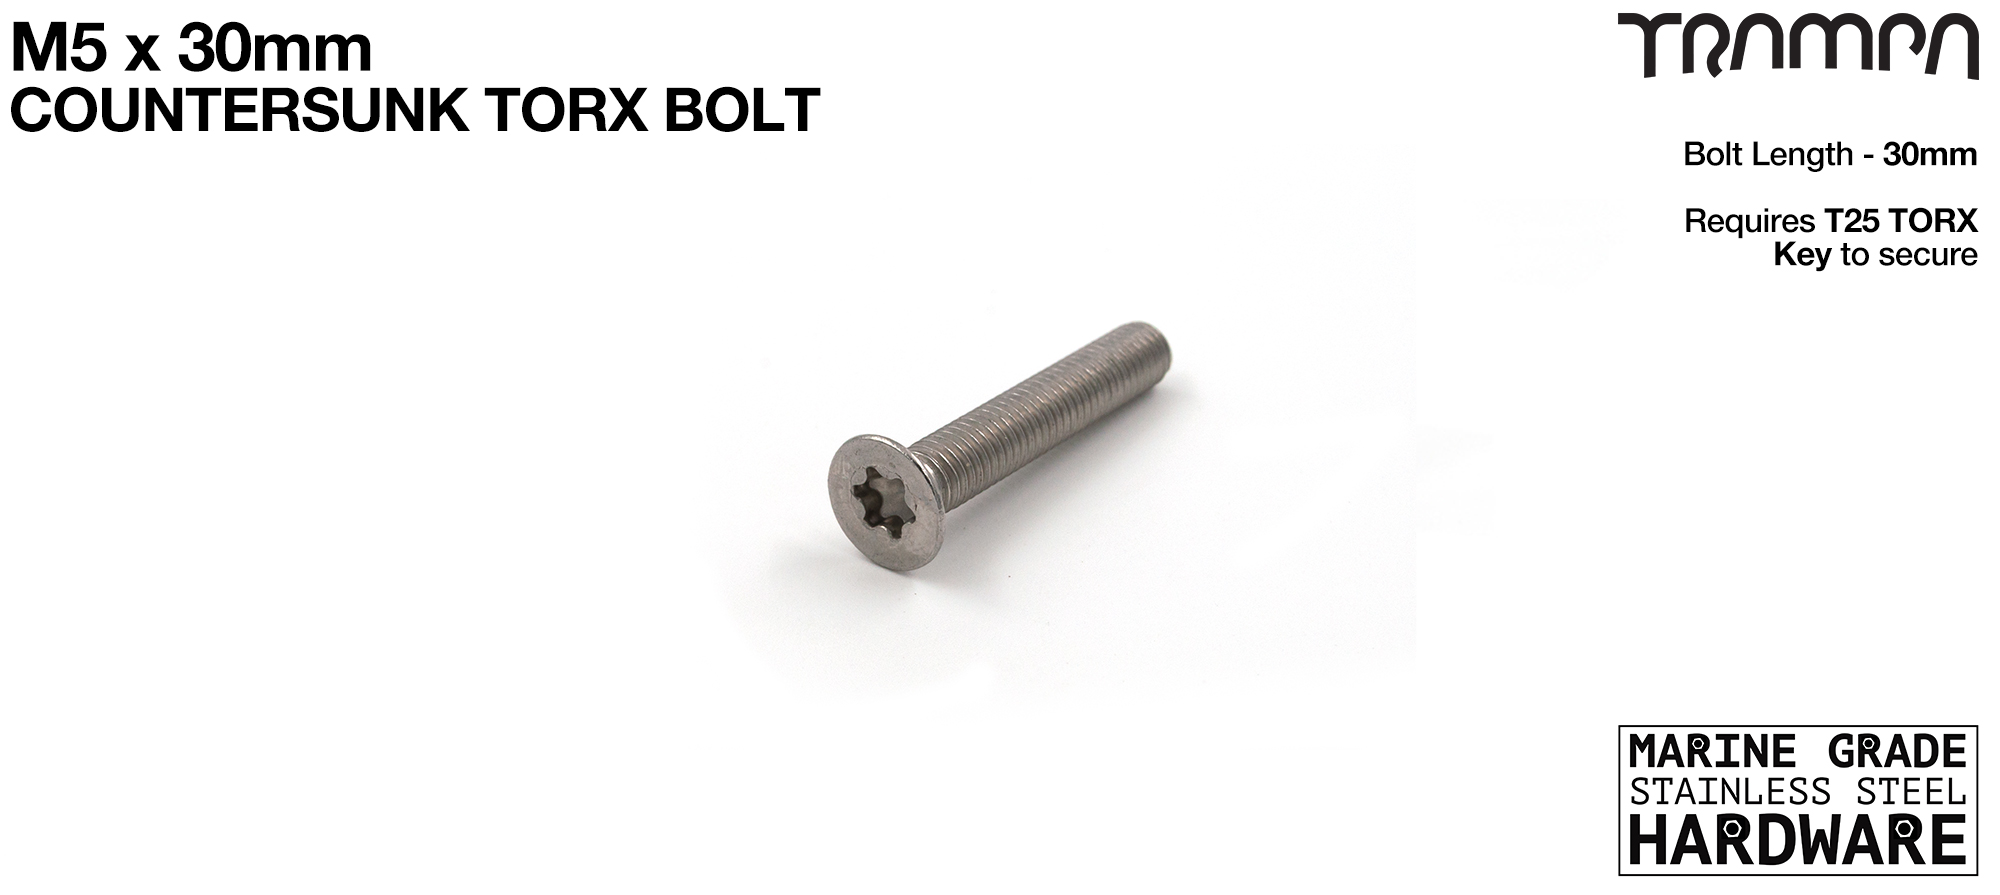 M5 x 30mm TORX Countersunk Bolt Stainless Steel